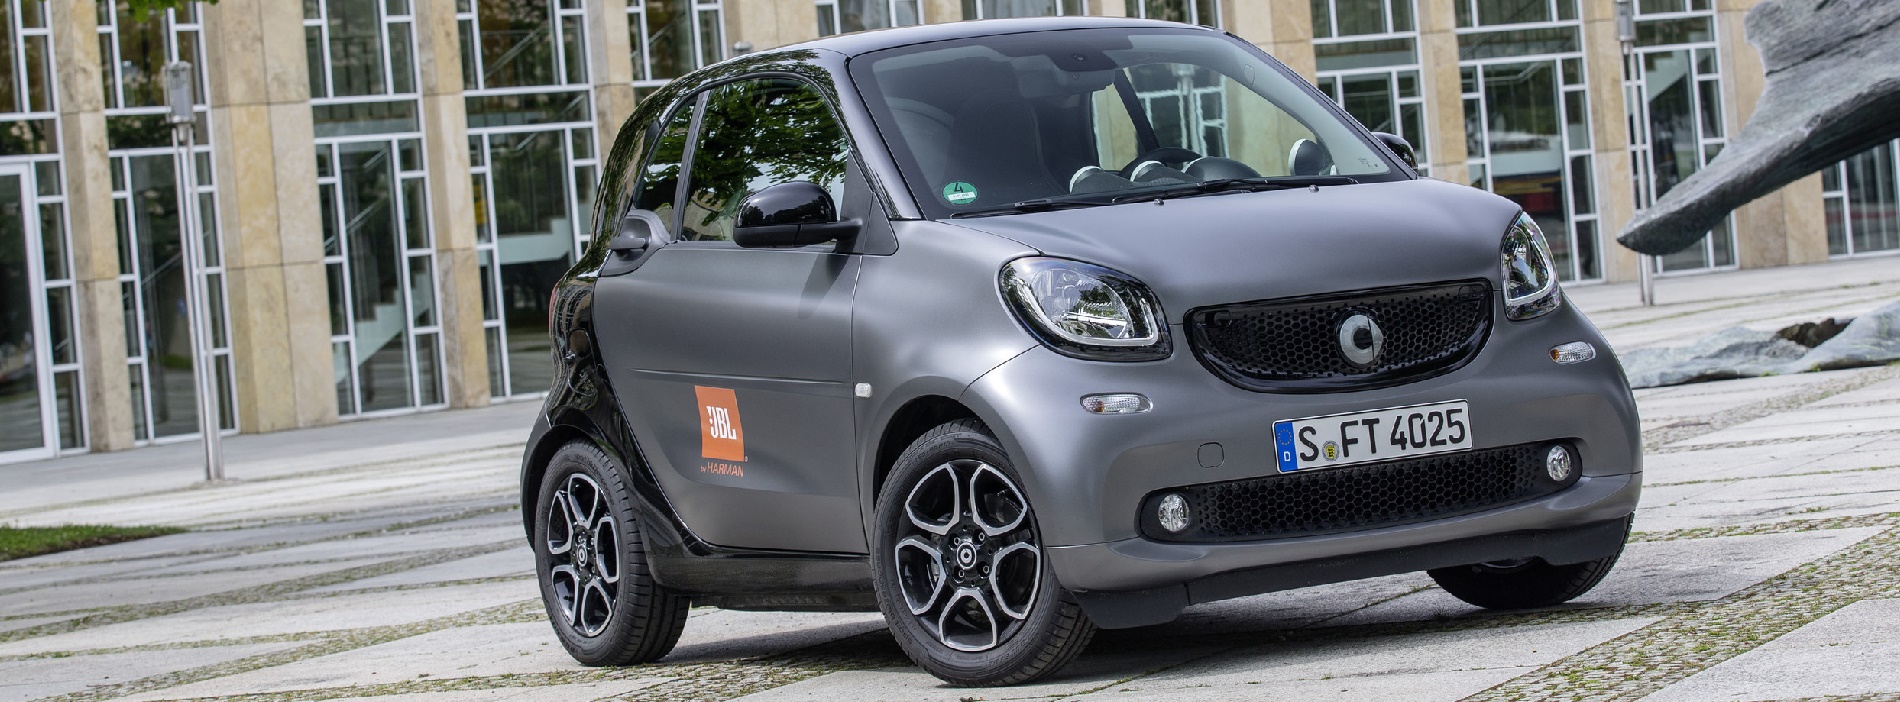 SMART FORTWO 90 0.9 Turbo Limited Edition JBL Twinamic